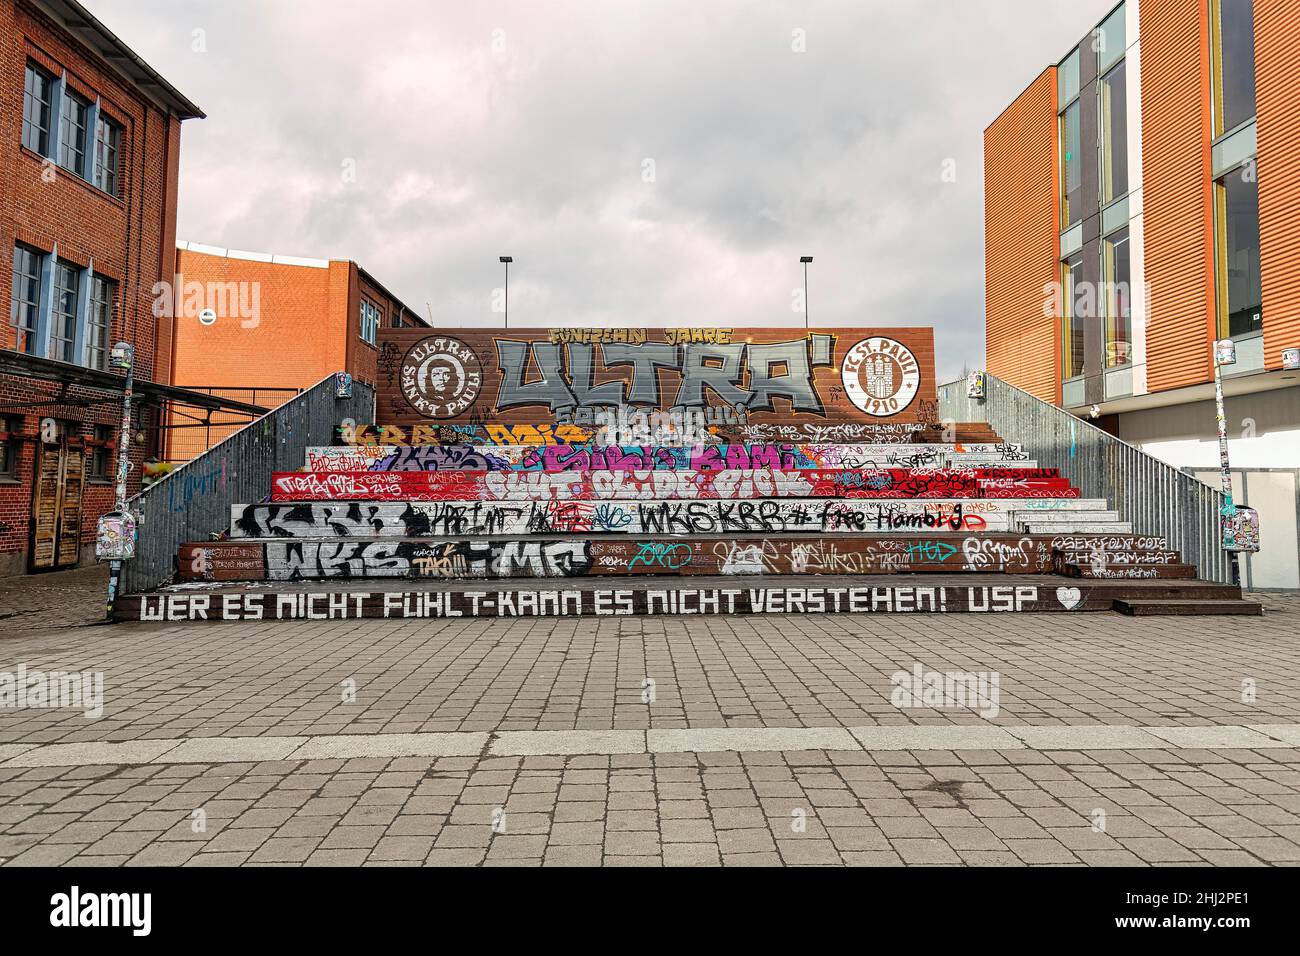 Wooden grandstand for FC St. Pauli football fans, with logo of the Ultra Sankt Pauli group, graffiti and slogans, Hamburg, Germany Stock Photo